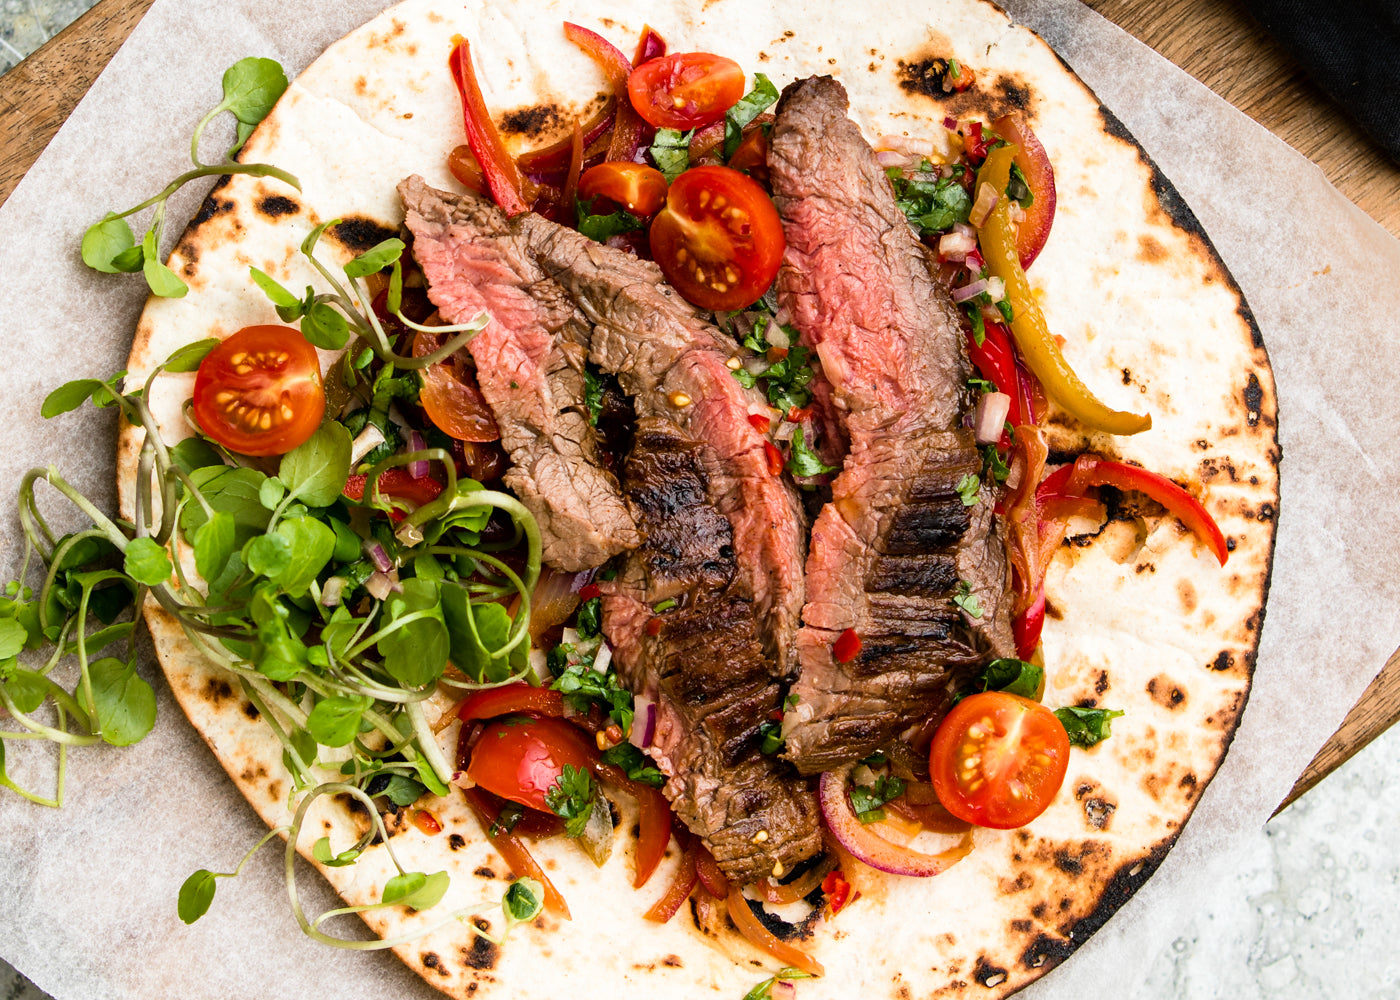 Gozney ovens - Roast, smoke, steam or bake. Super fast or low and slow. From perfect Neapolitan pizza to slow cooked pork belly, enjoy a wood-fired adventure, every time.